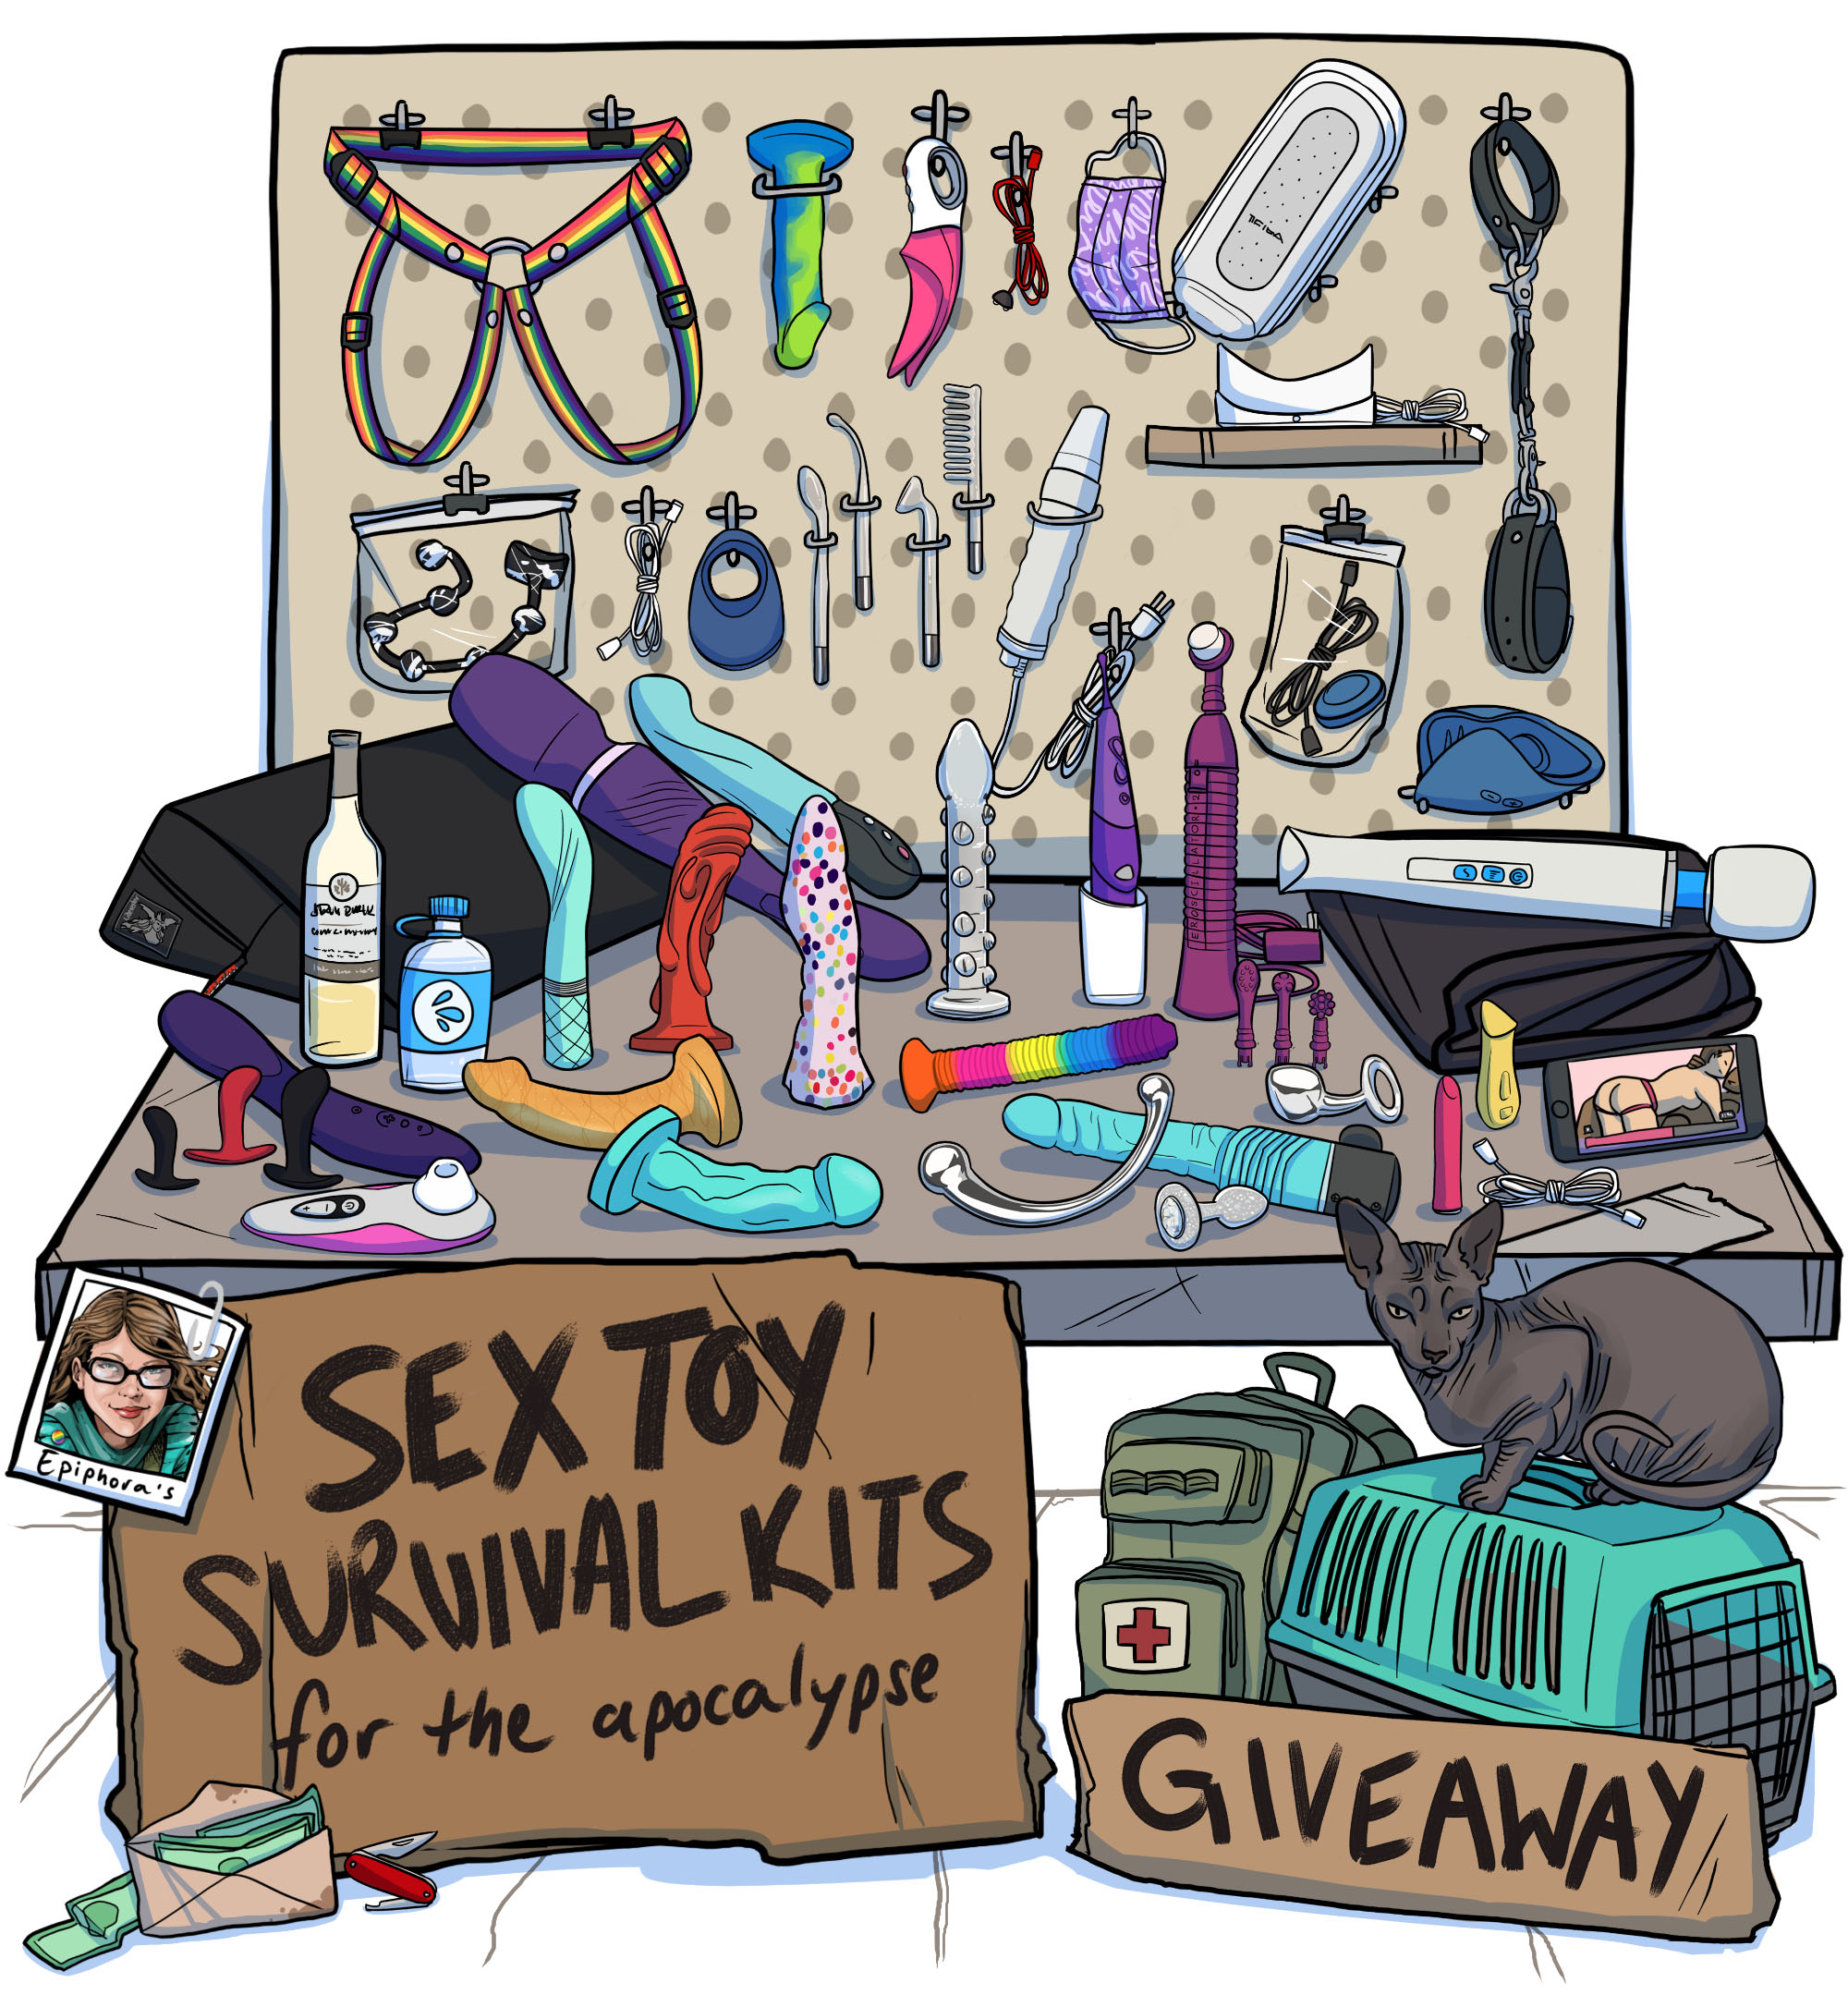 Giveaway sex toy survival kits for the apocalypse » Hey Epiphora picture image